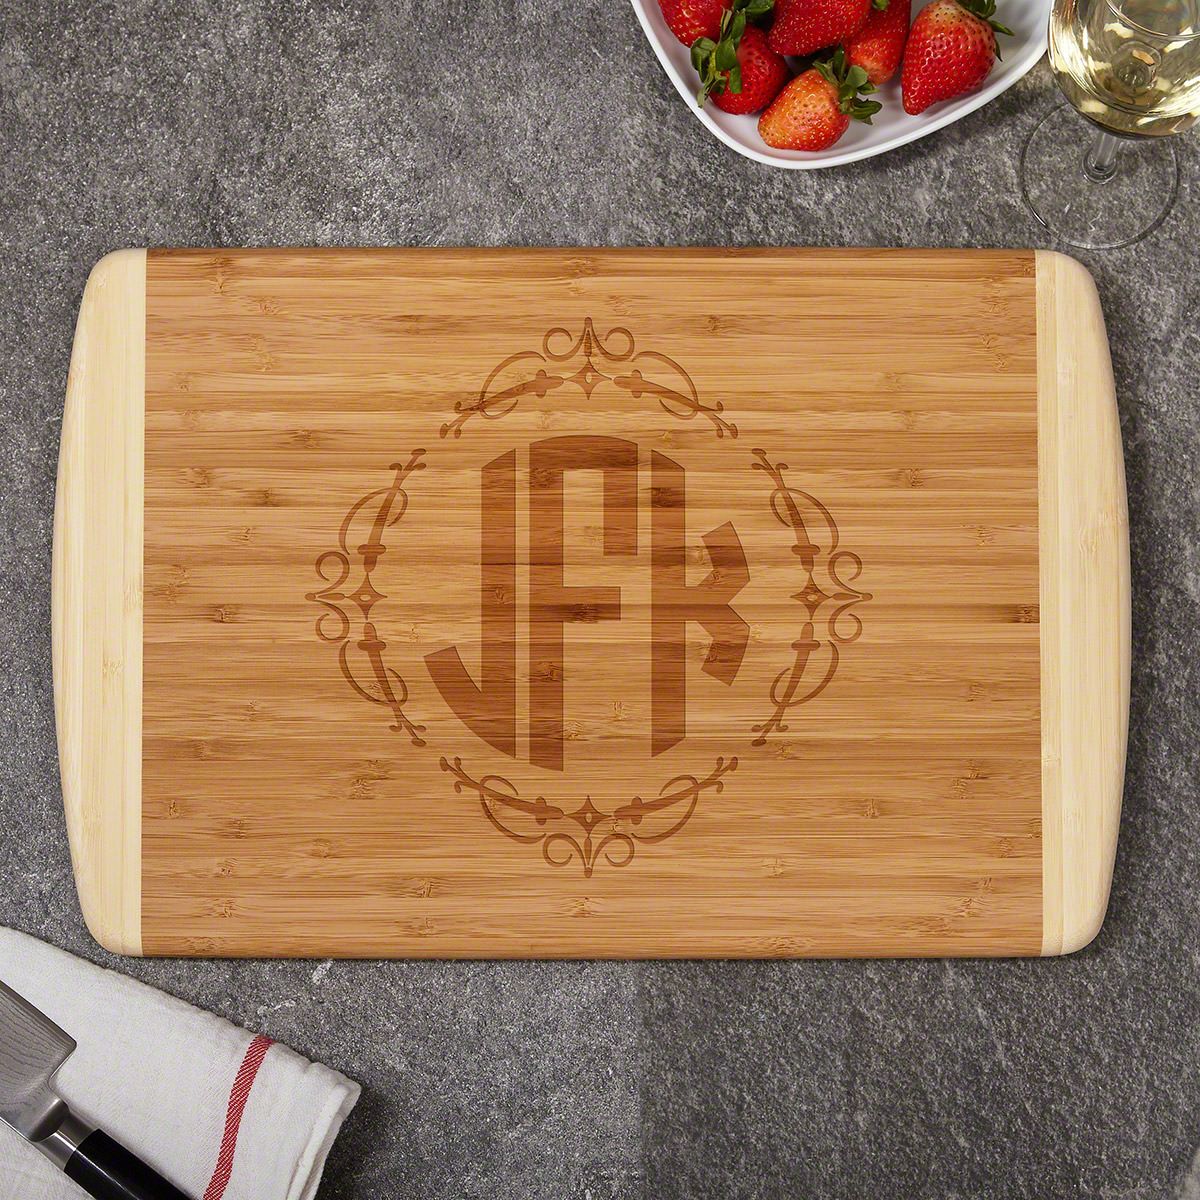 Custom Engraved Bamboo Cutting Board Monogram initial andname great Gift idea perfect for a wedding or anniversary